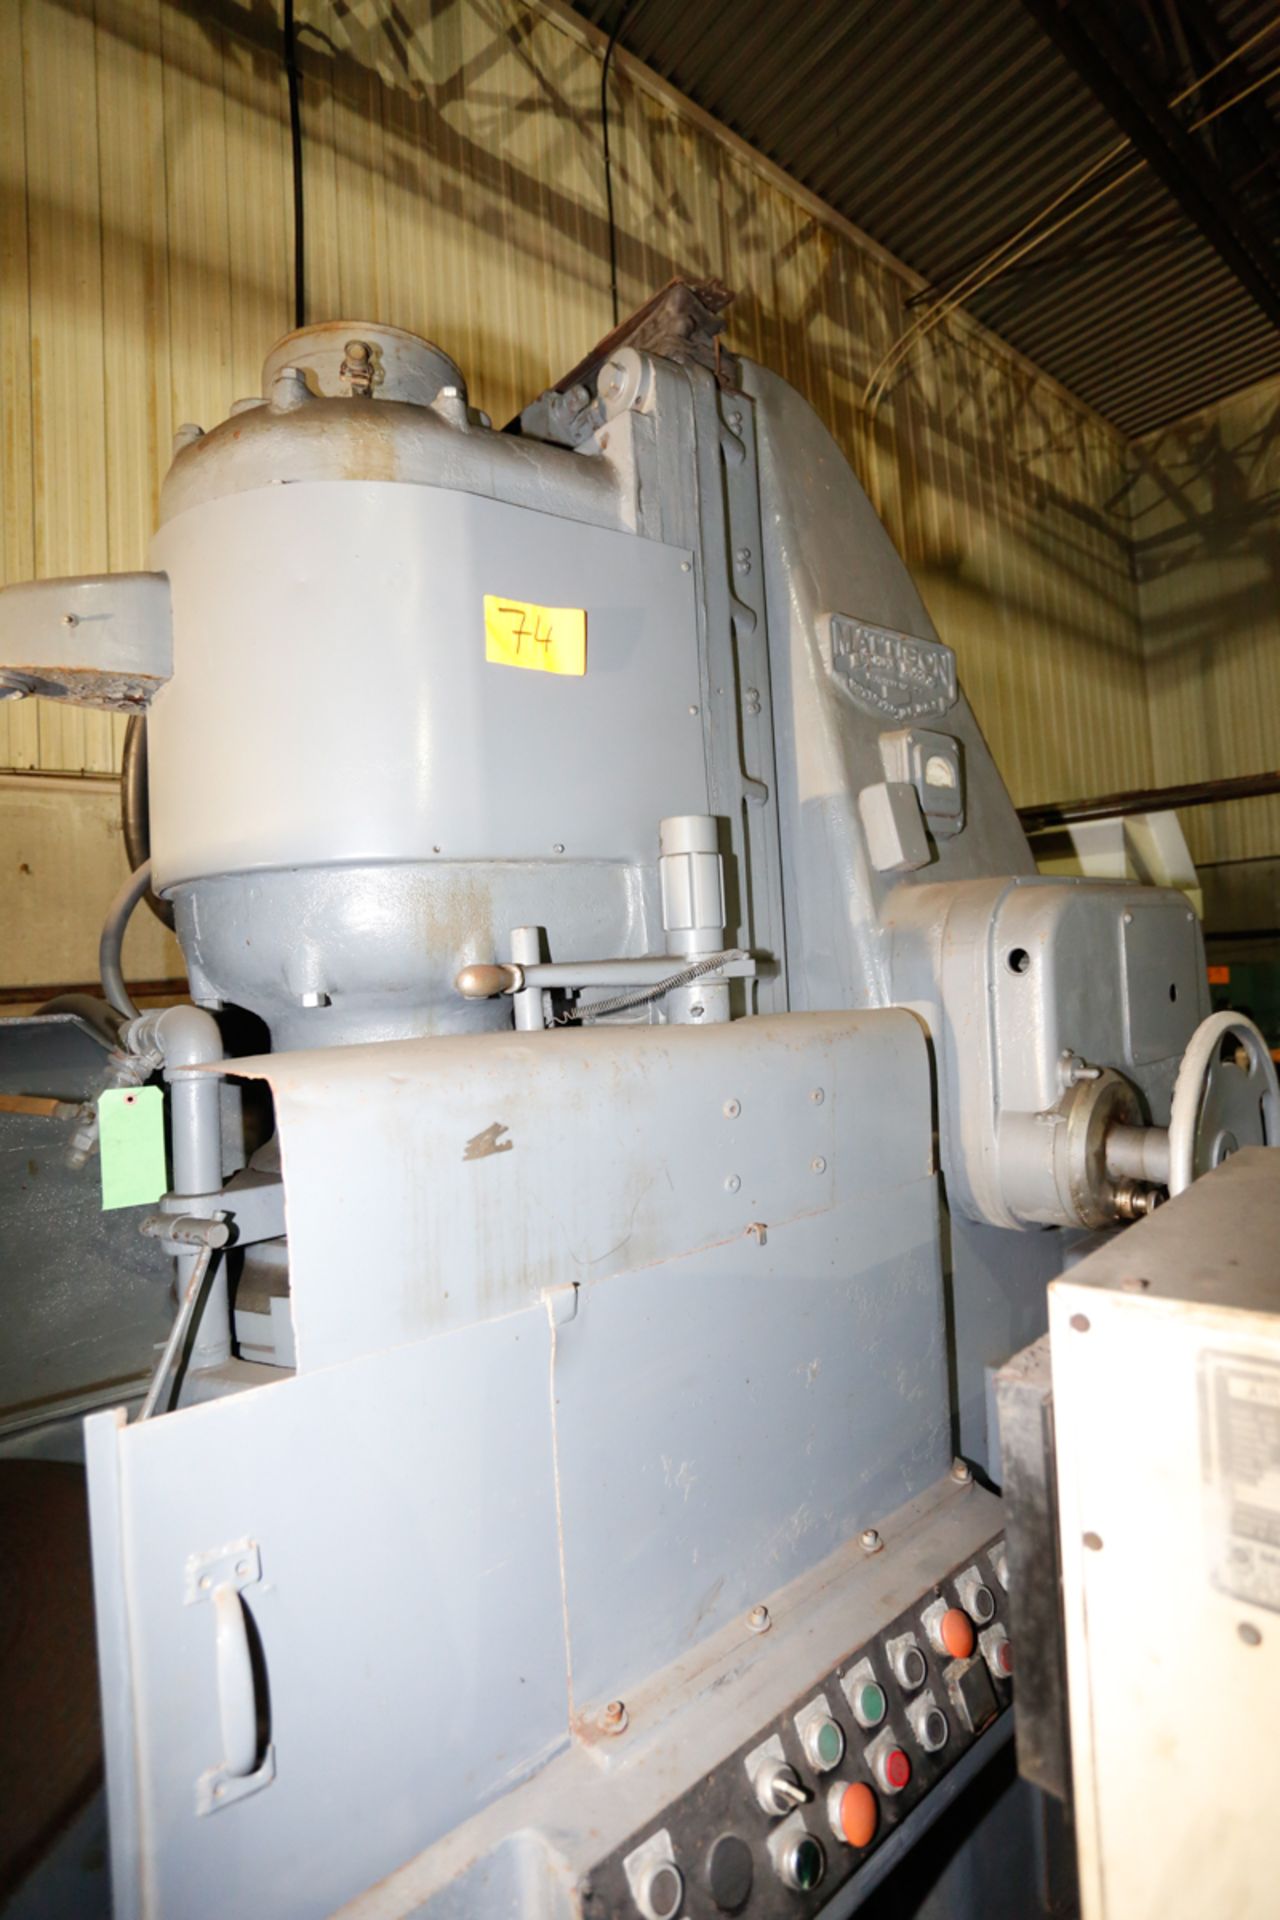 MATTISON #24 ROTARY SURFACE GRINDER,40 HP, 36" CHUCK, S/N 24-120 - LOCATED IN RICHMOND, QC - Image 3 of 5